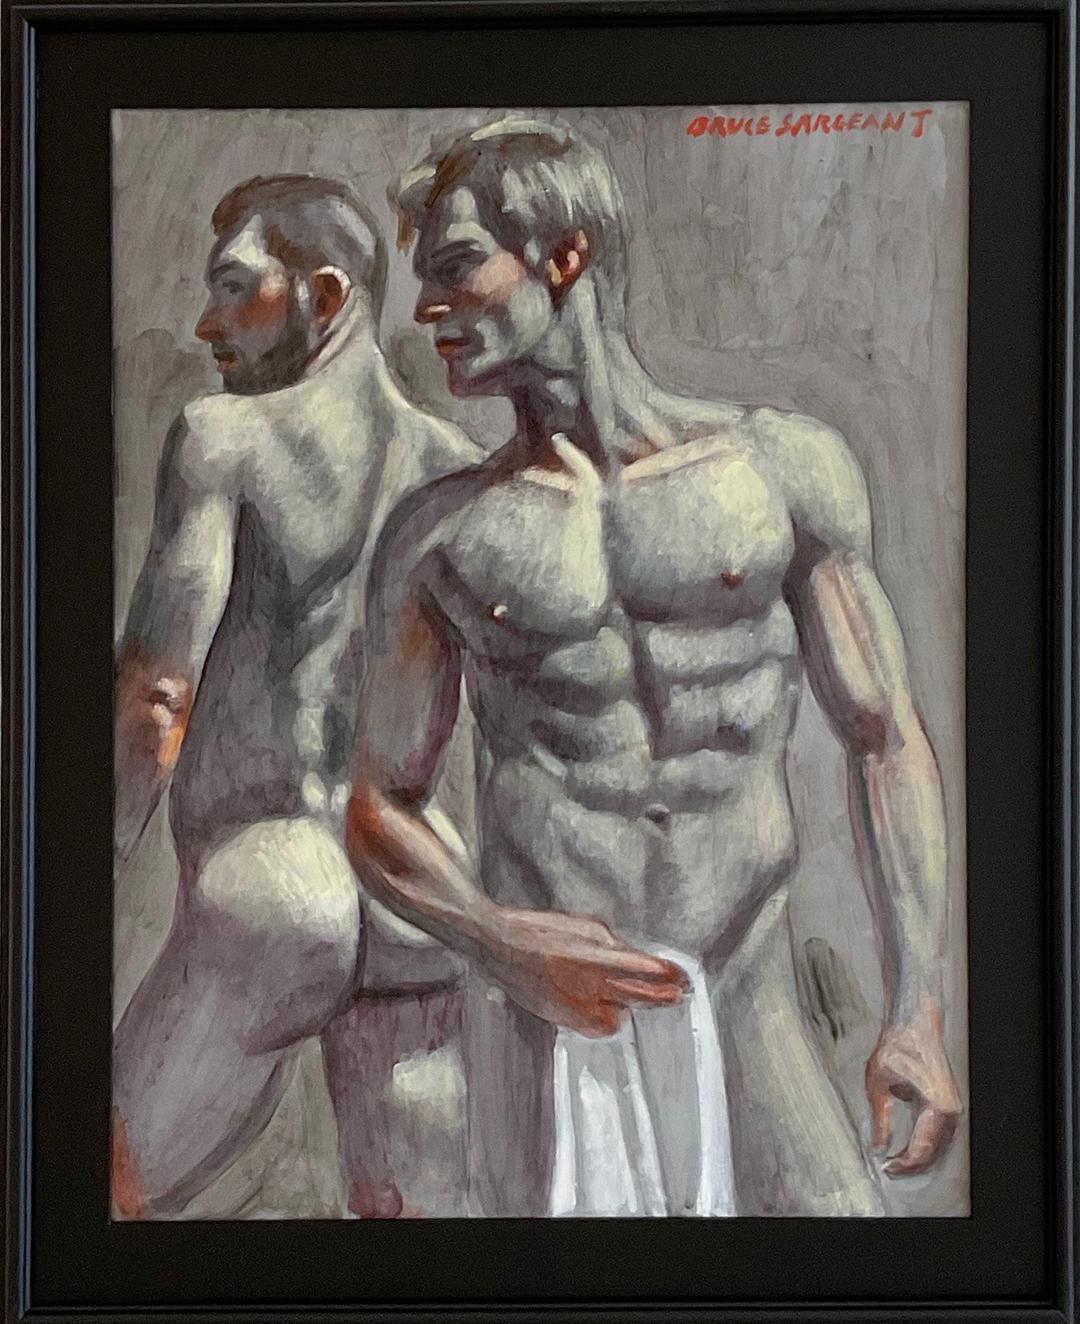 Brian & Chris (Figurative Painting of Two Nude Men by Mark Beard) 2